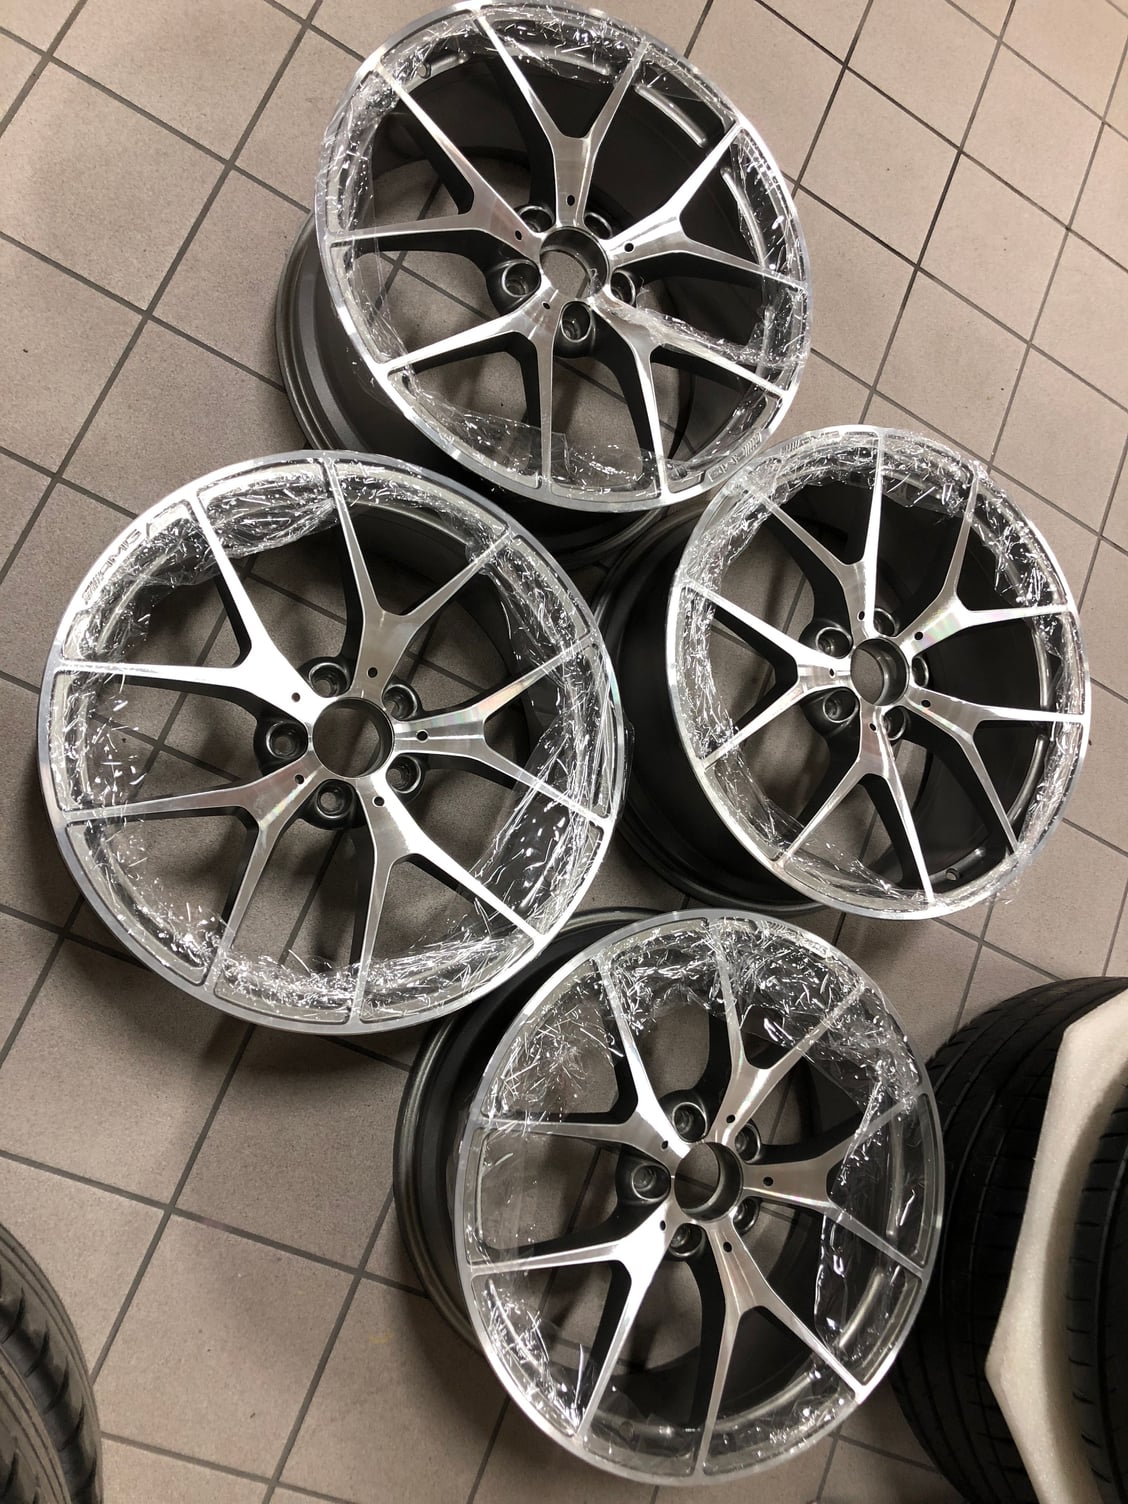 Wheels and Tires/Axles - Forged 507 C63 rims with Pilot Super Sports - Used - 2008 to 2018 Mercedes-Benz C63 AMG - Toronto, ON L3R4T1, Canada